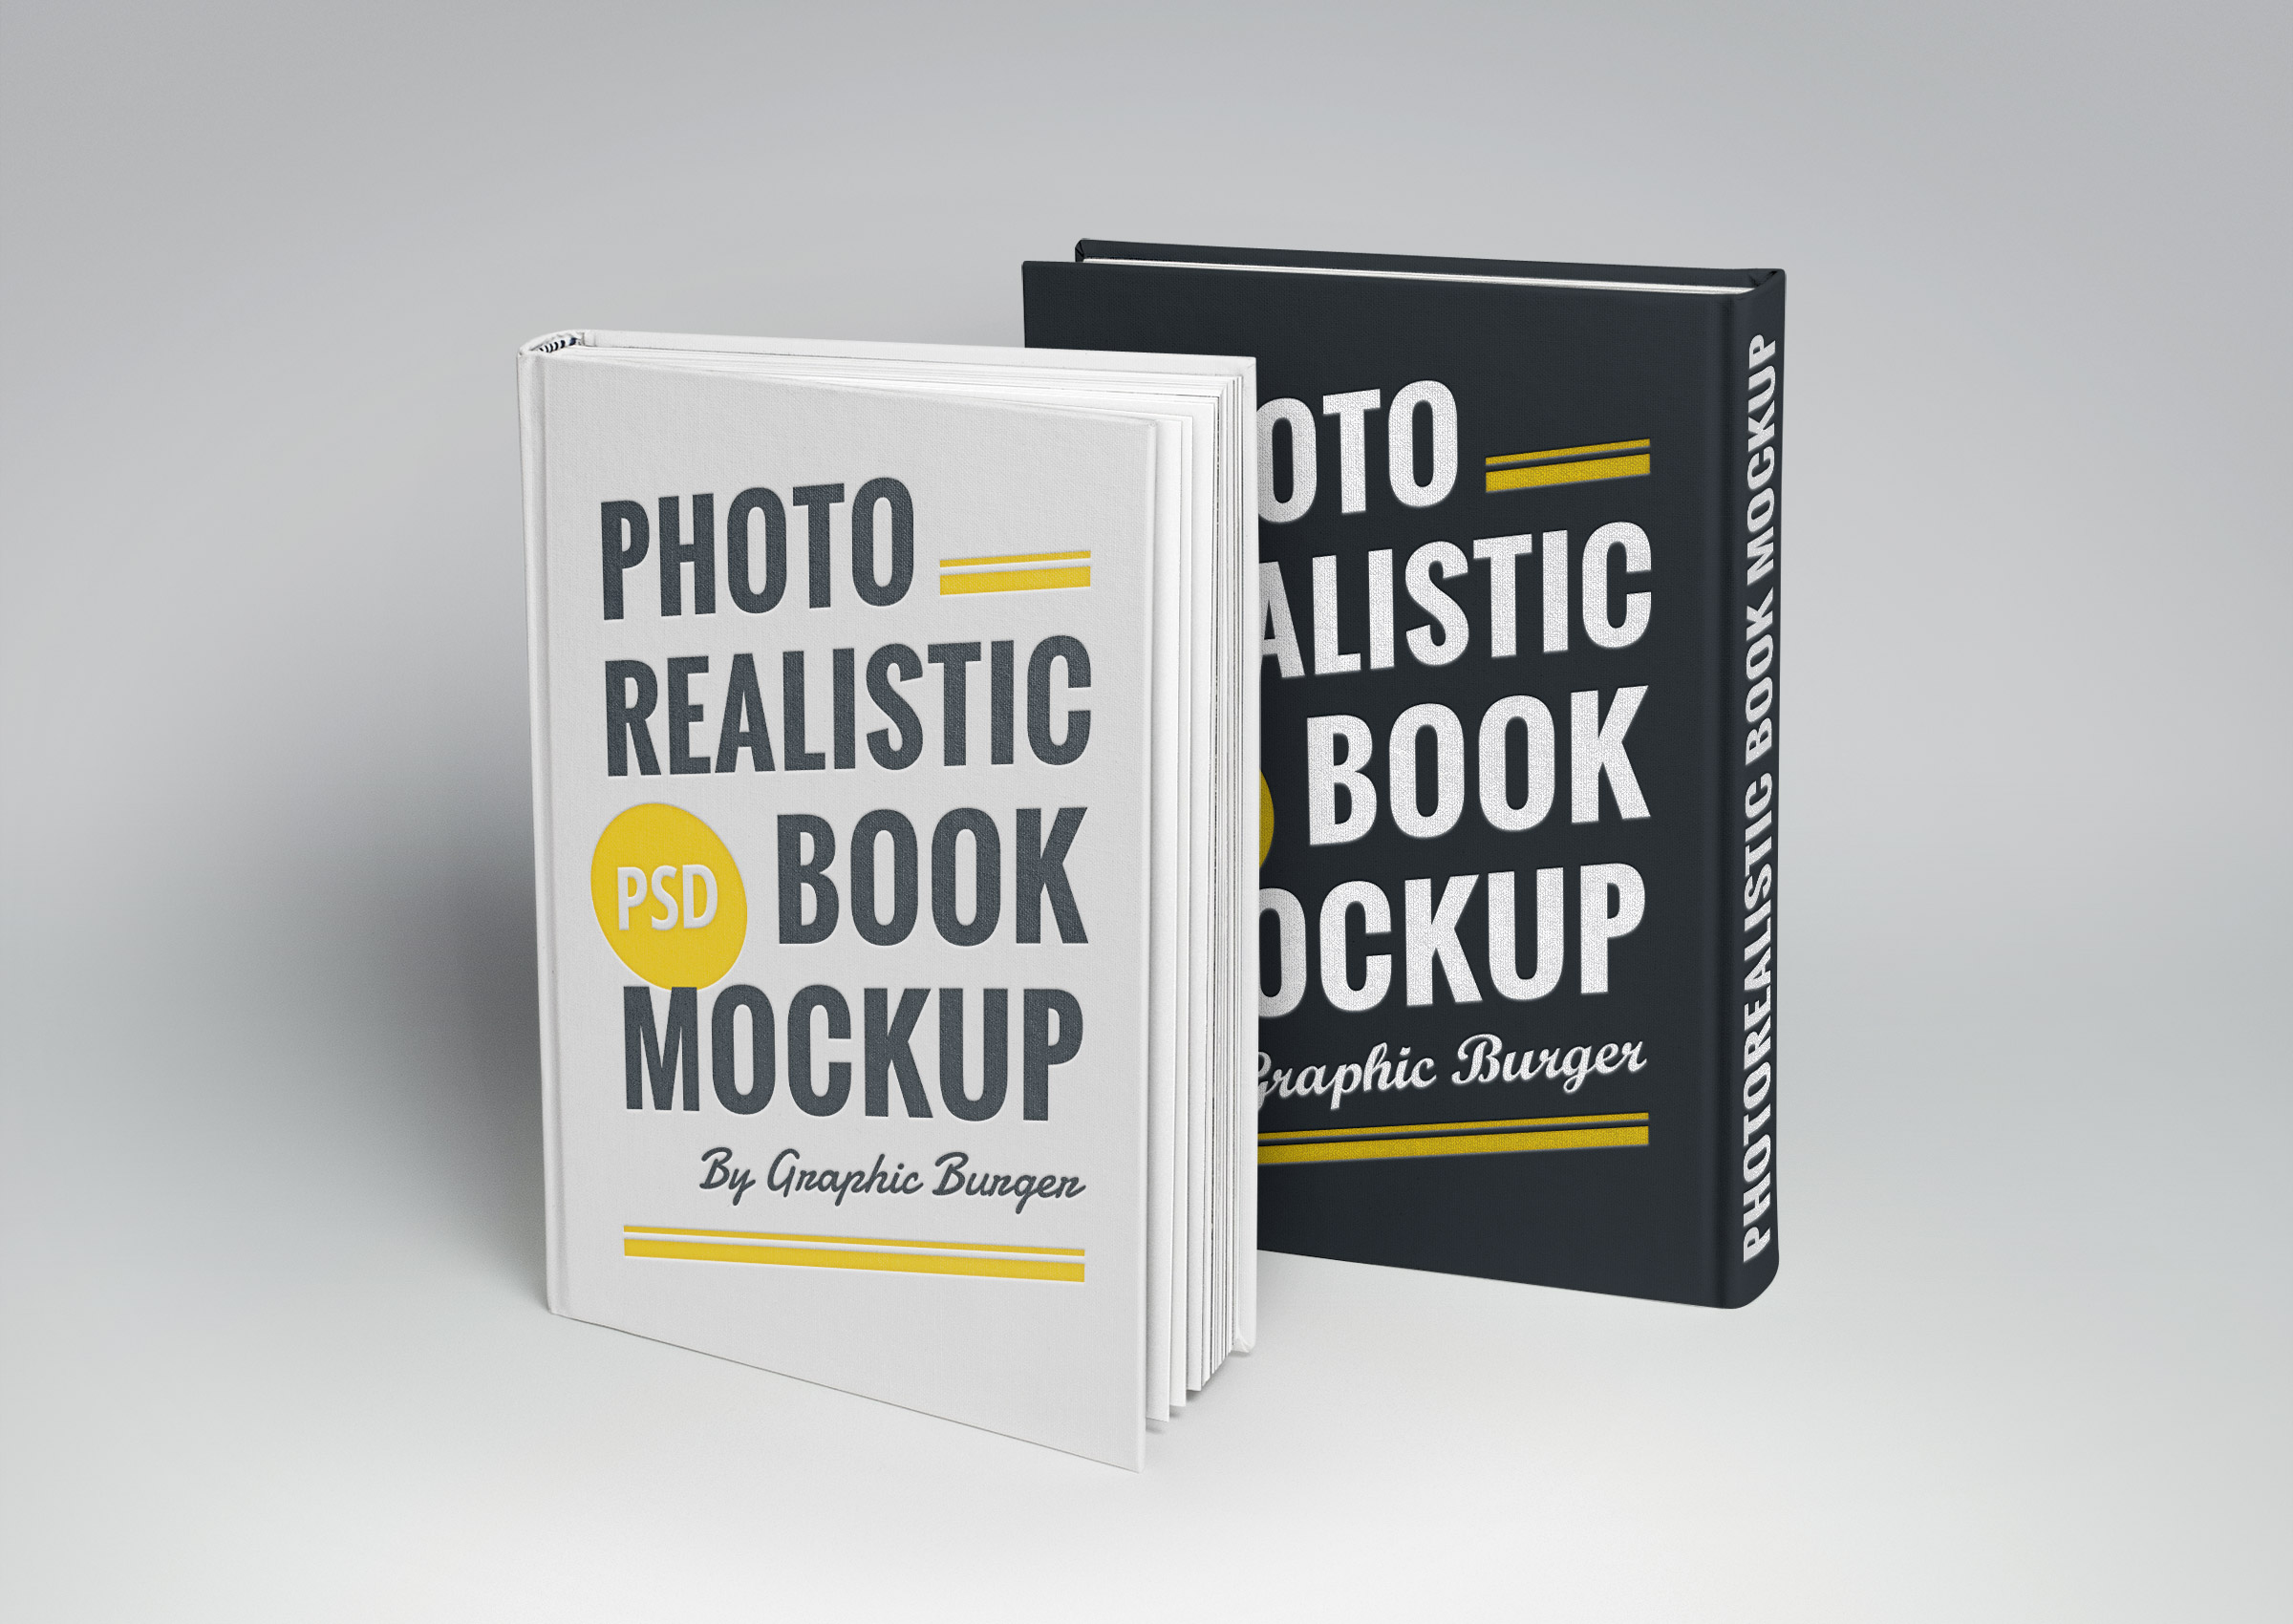 Two standing hardcover books with "hardcover book mockup" on the cover, showcasing a clean and professional template design for presentations.